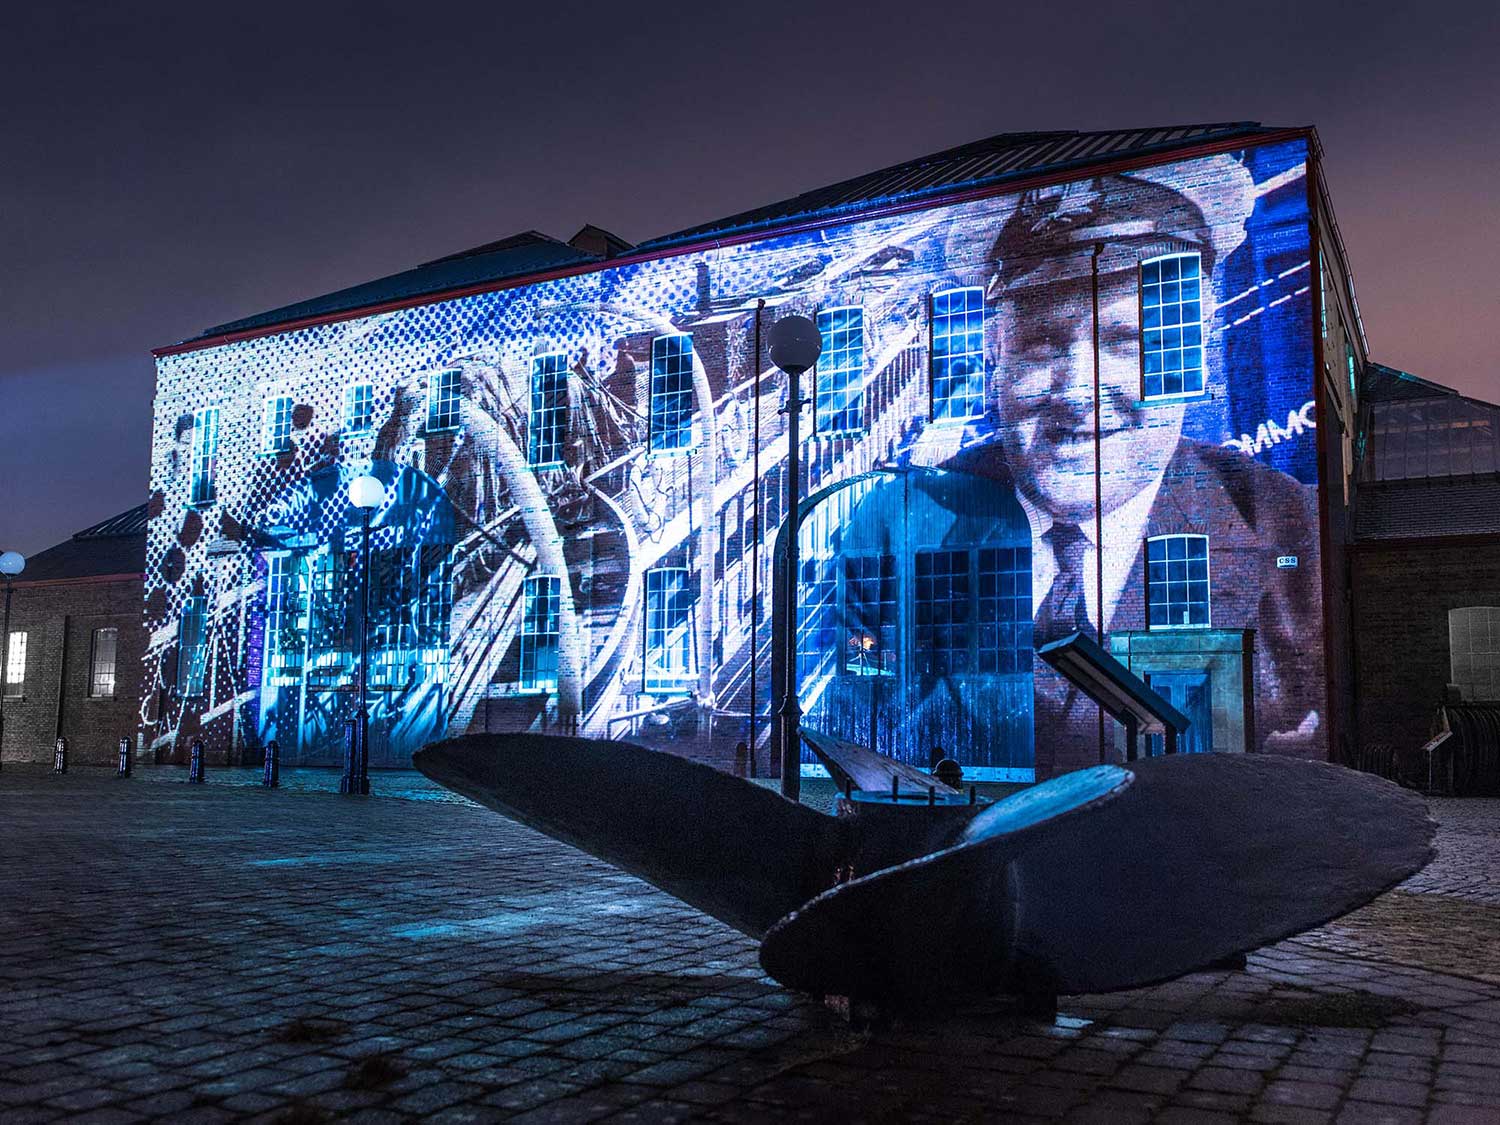 Illumination, Irvine Maritime Museum Building Projections show, archive footage